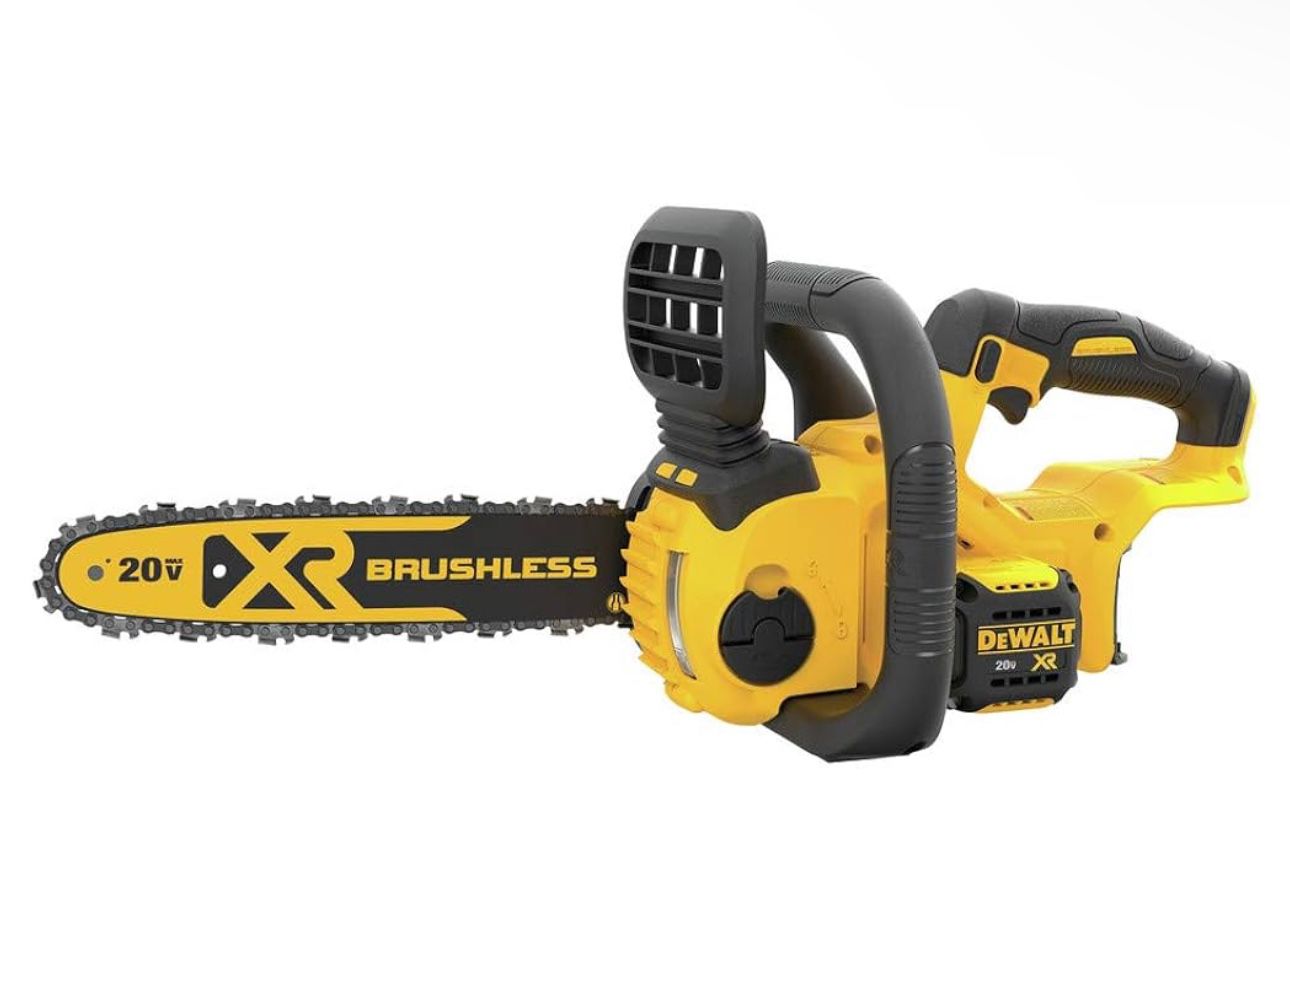 DEWALT DCCS620B 20V Max Compact Cordless Chainsaw with Brushless Motor, Tool Only